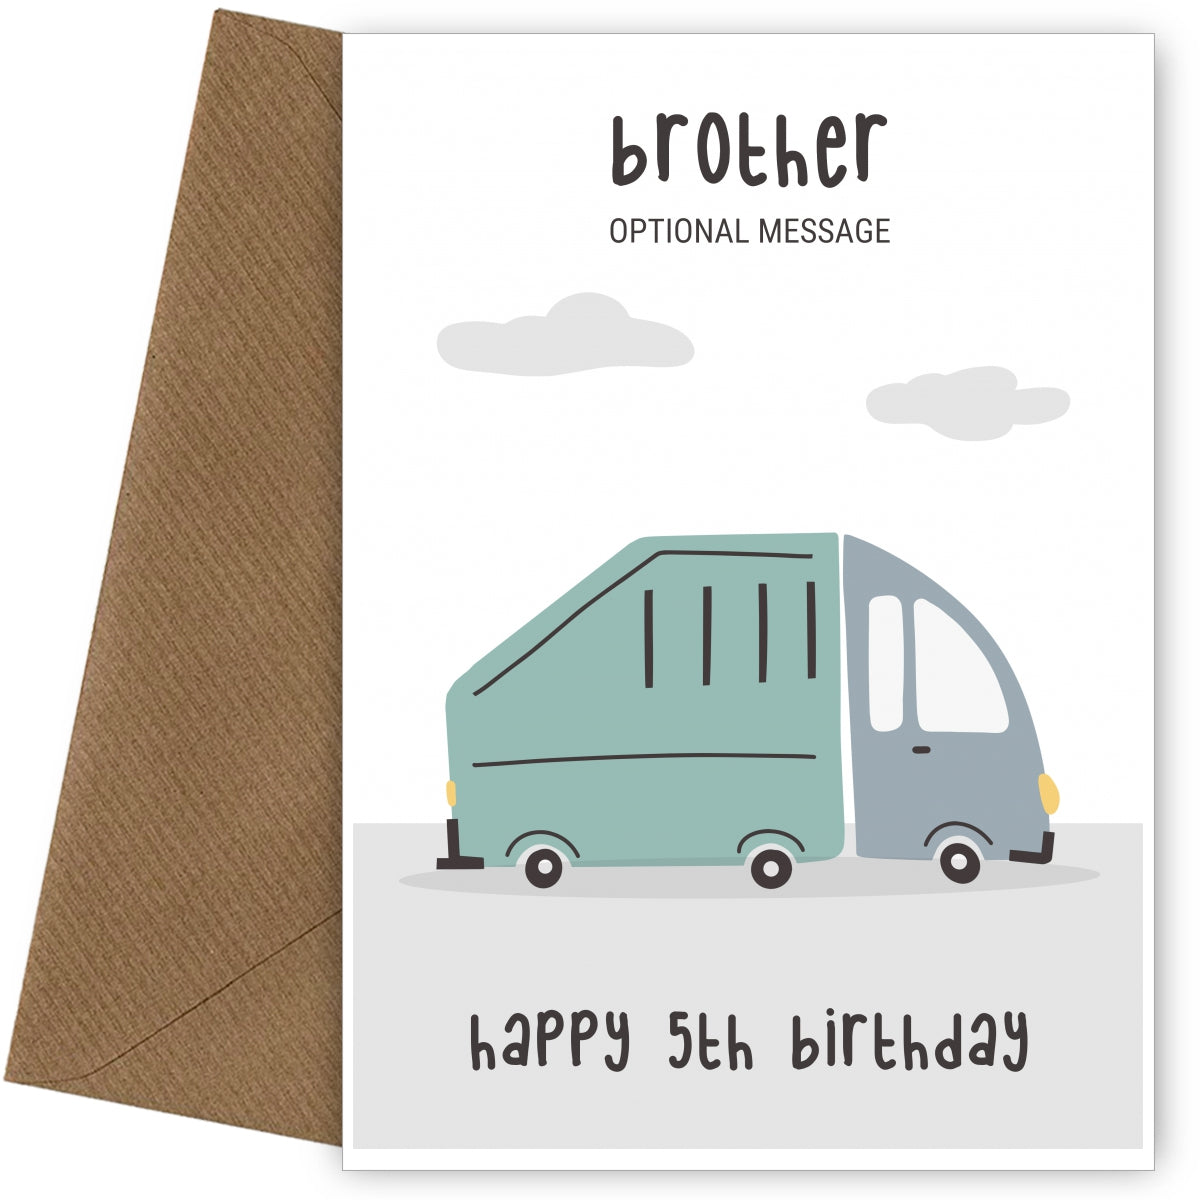 Fun Vehicles 5th Birthday Card for Brother - Garbage Truck